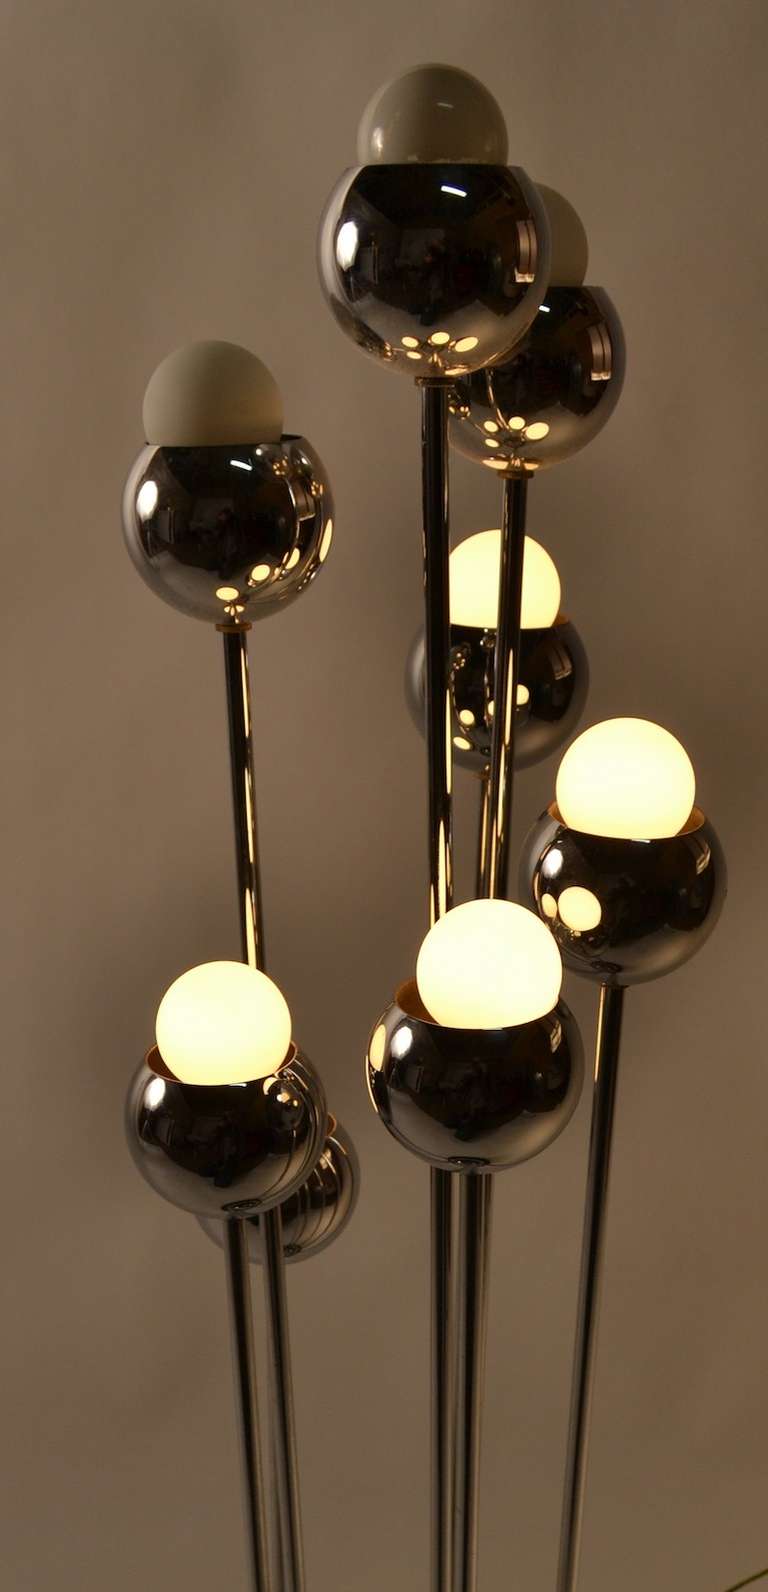 8 Light Chrome Ball Table Lamp In Excellent Condition For Sale In New York, NY